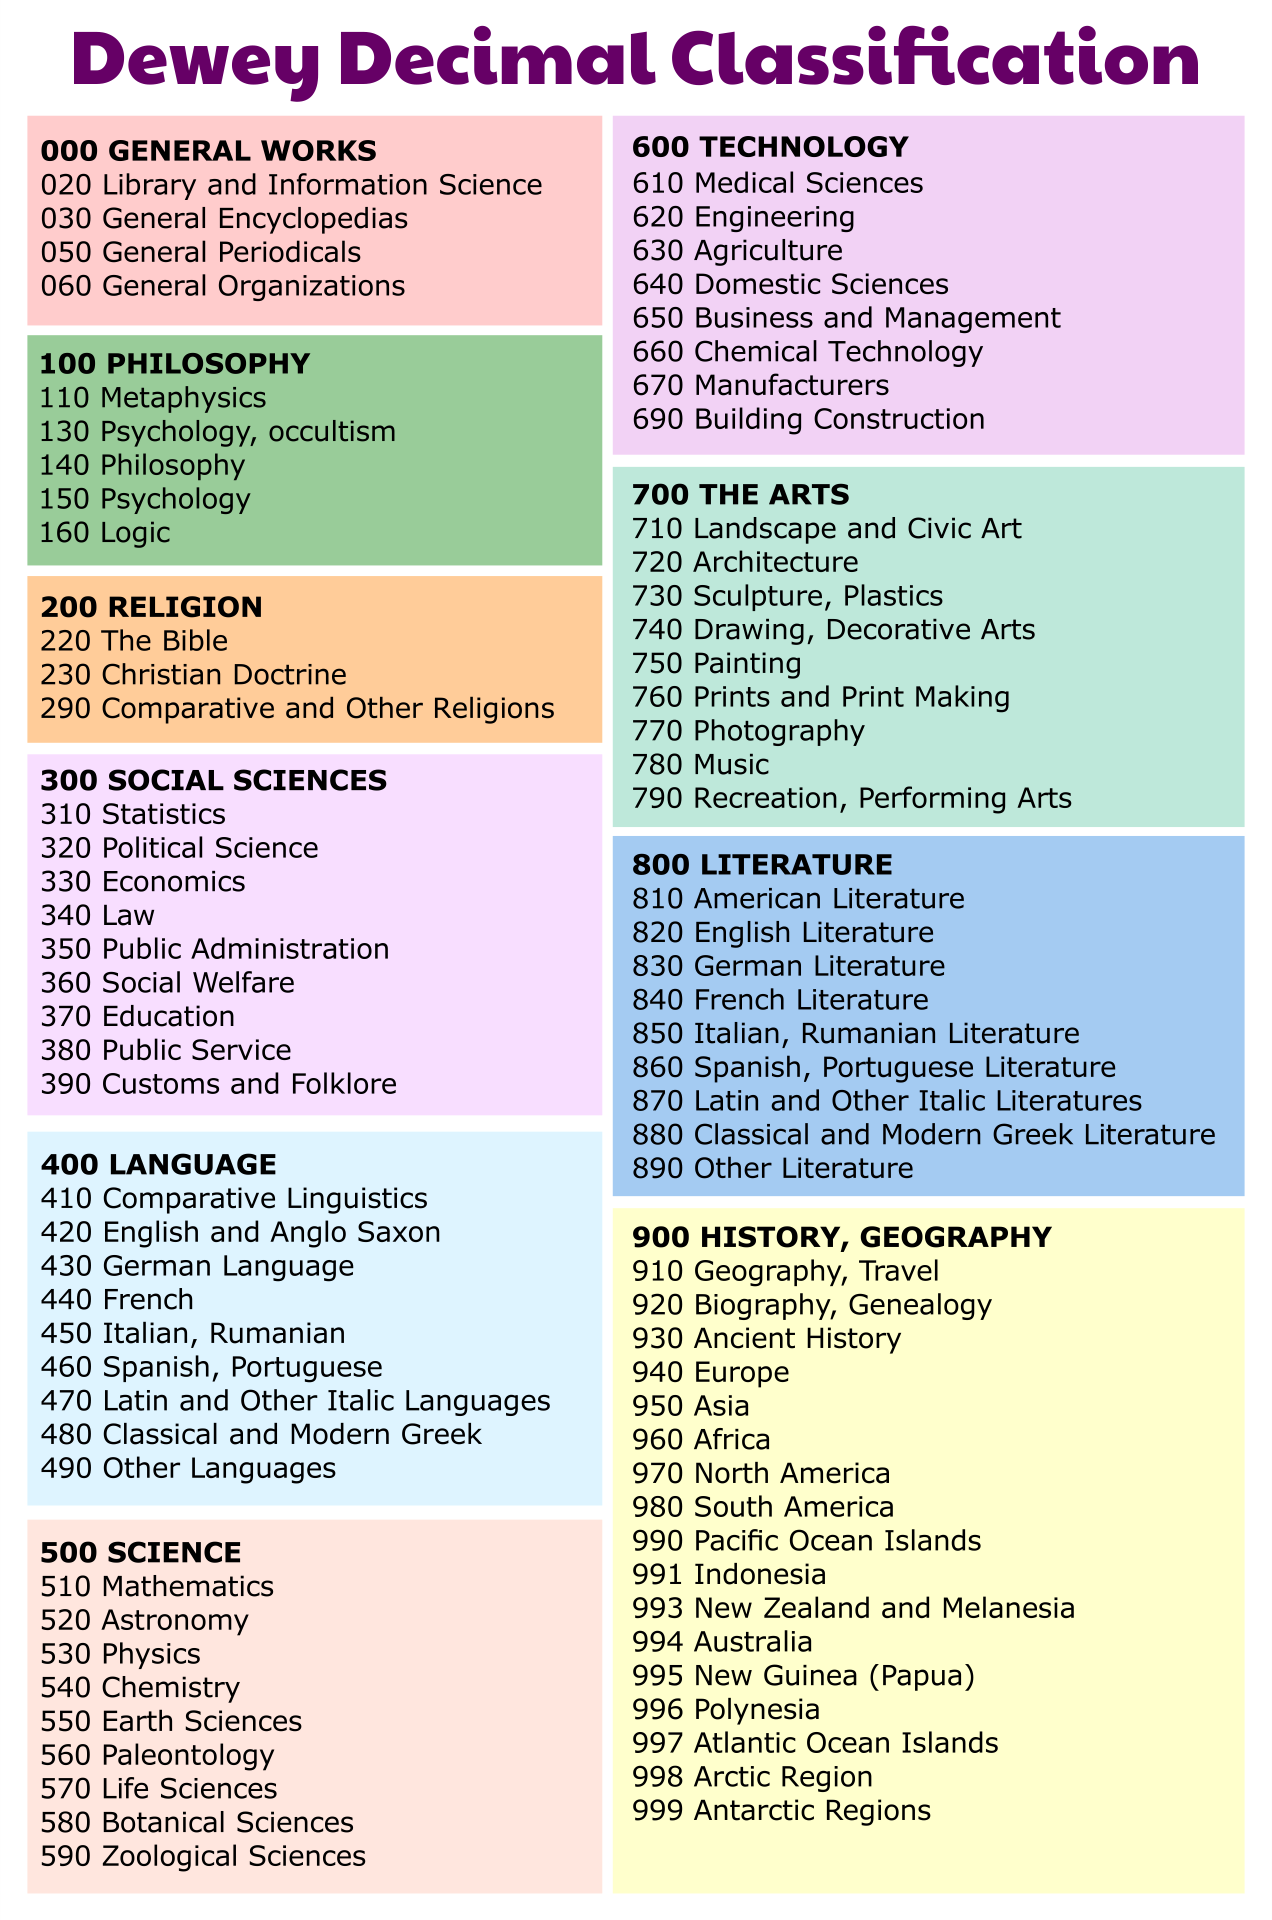 8-best-images-of-printable-dewey-decimal-system-posters-for-free